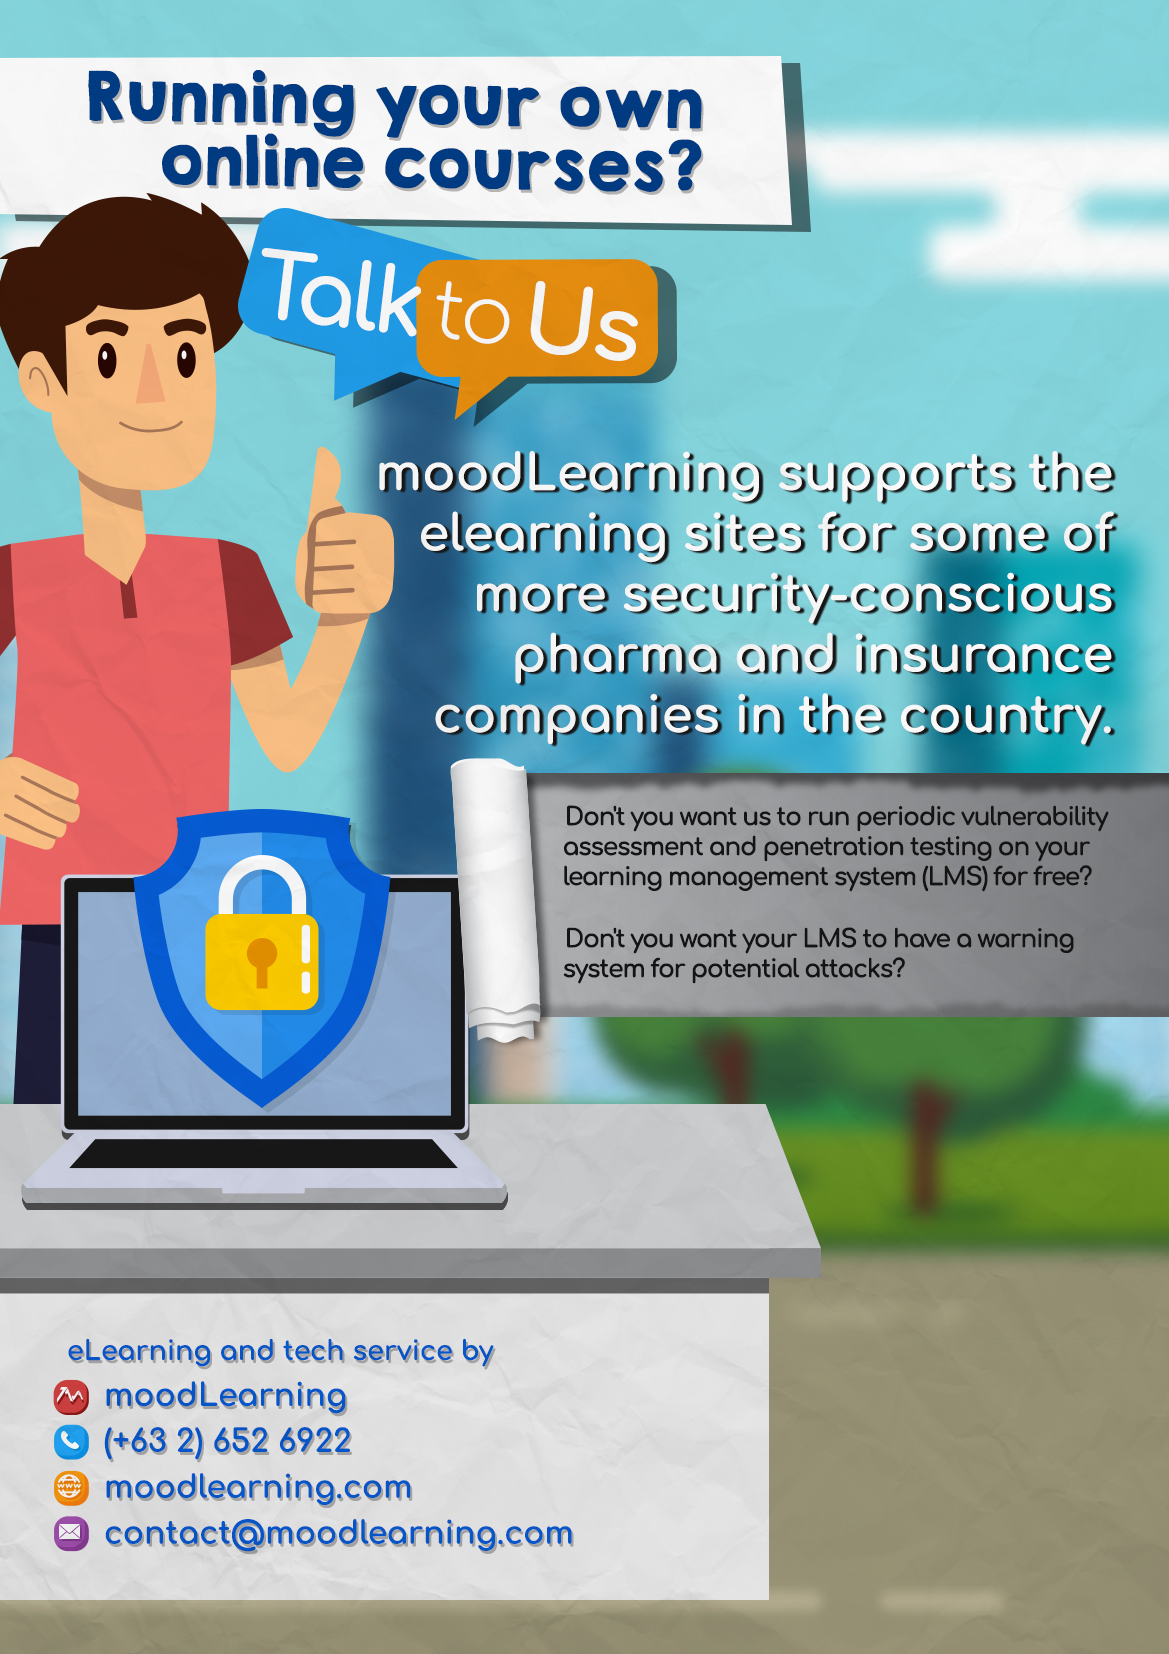 moodLearning supports elearning sites for some of more security-conscious pharma and insurance companies in the country